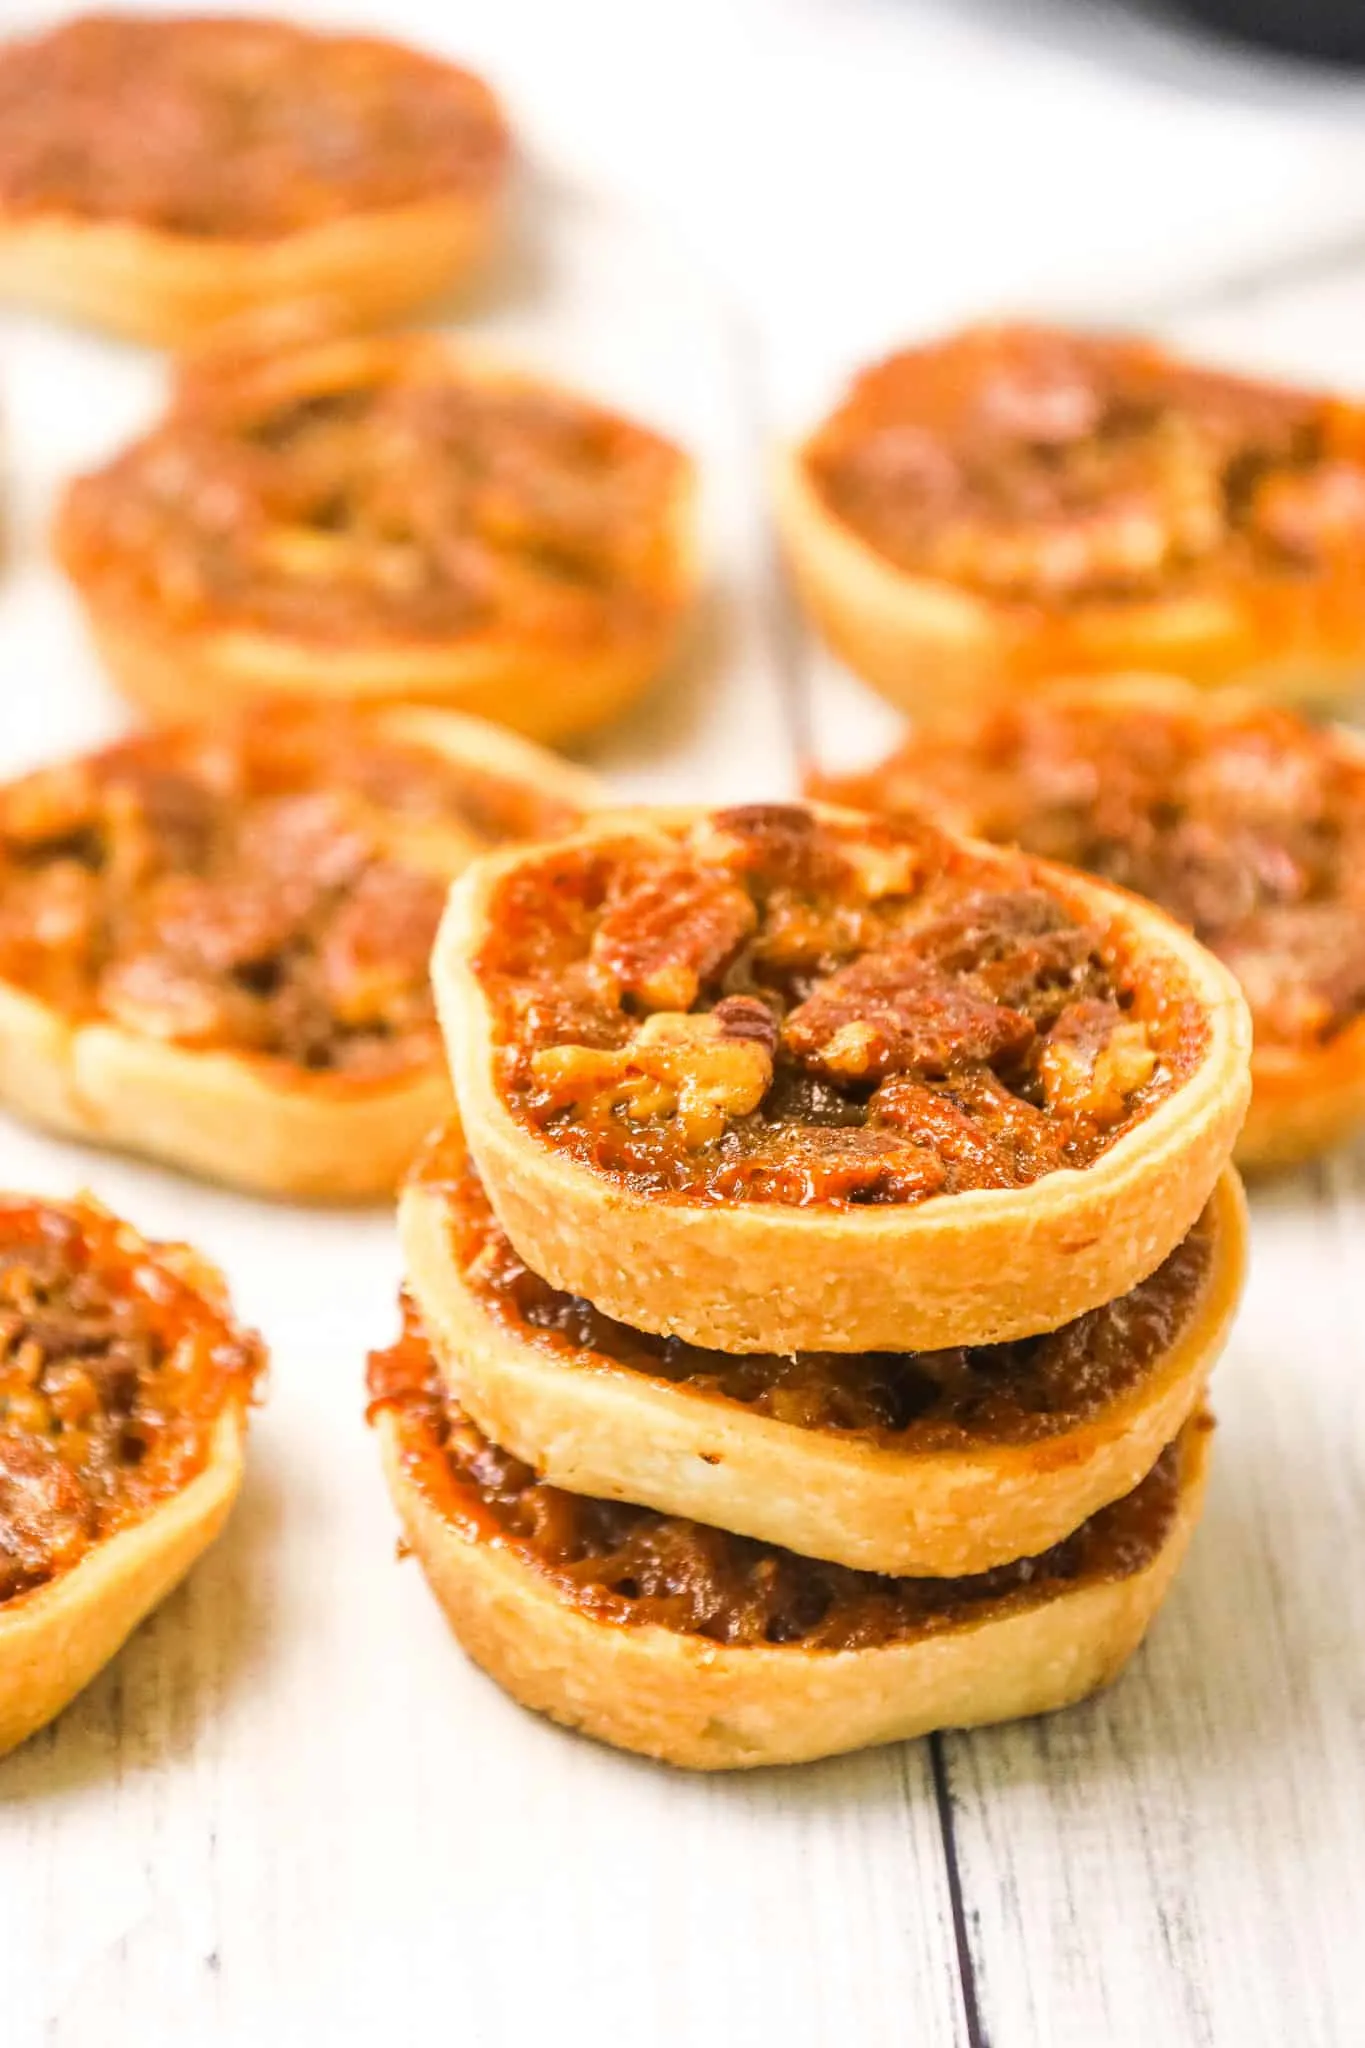 Pecan Tarts are delicious pastries with a sweet caramel and chopped pecan filling.